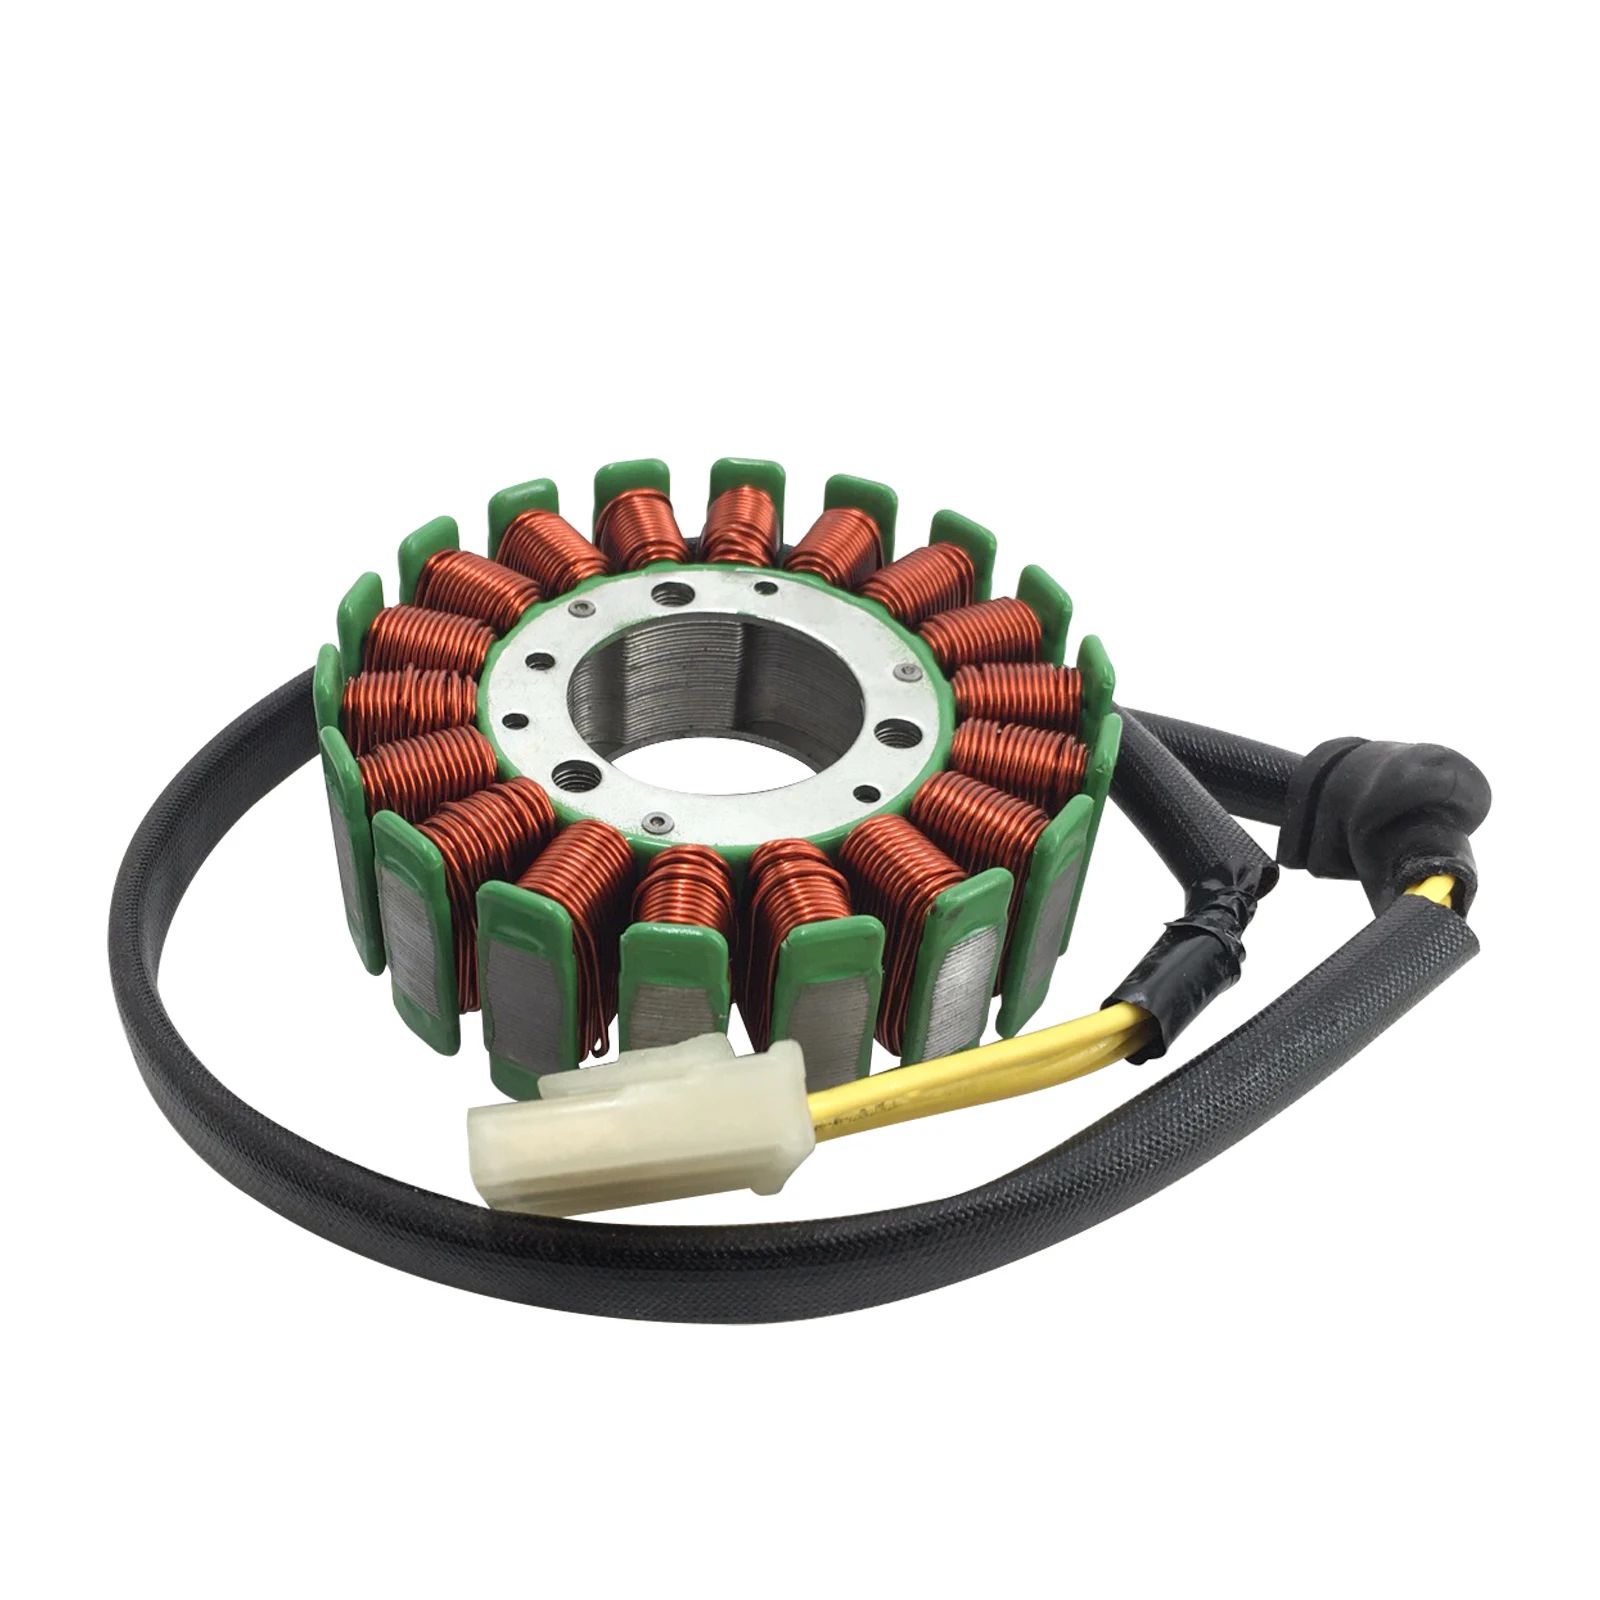 Generator Stator Coils Ignition Stator Coil Magneto For KTM 125 200 DUKE 125 200 RC125 RC200 /ABS 90139004000 Motorcycle Quad